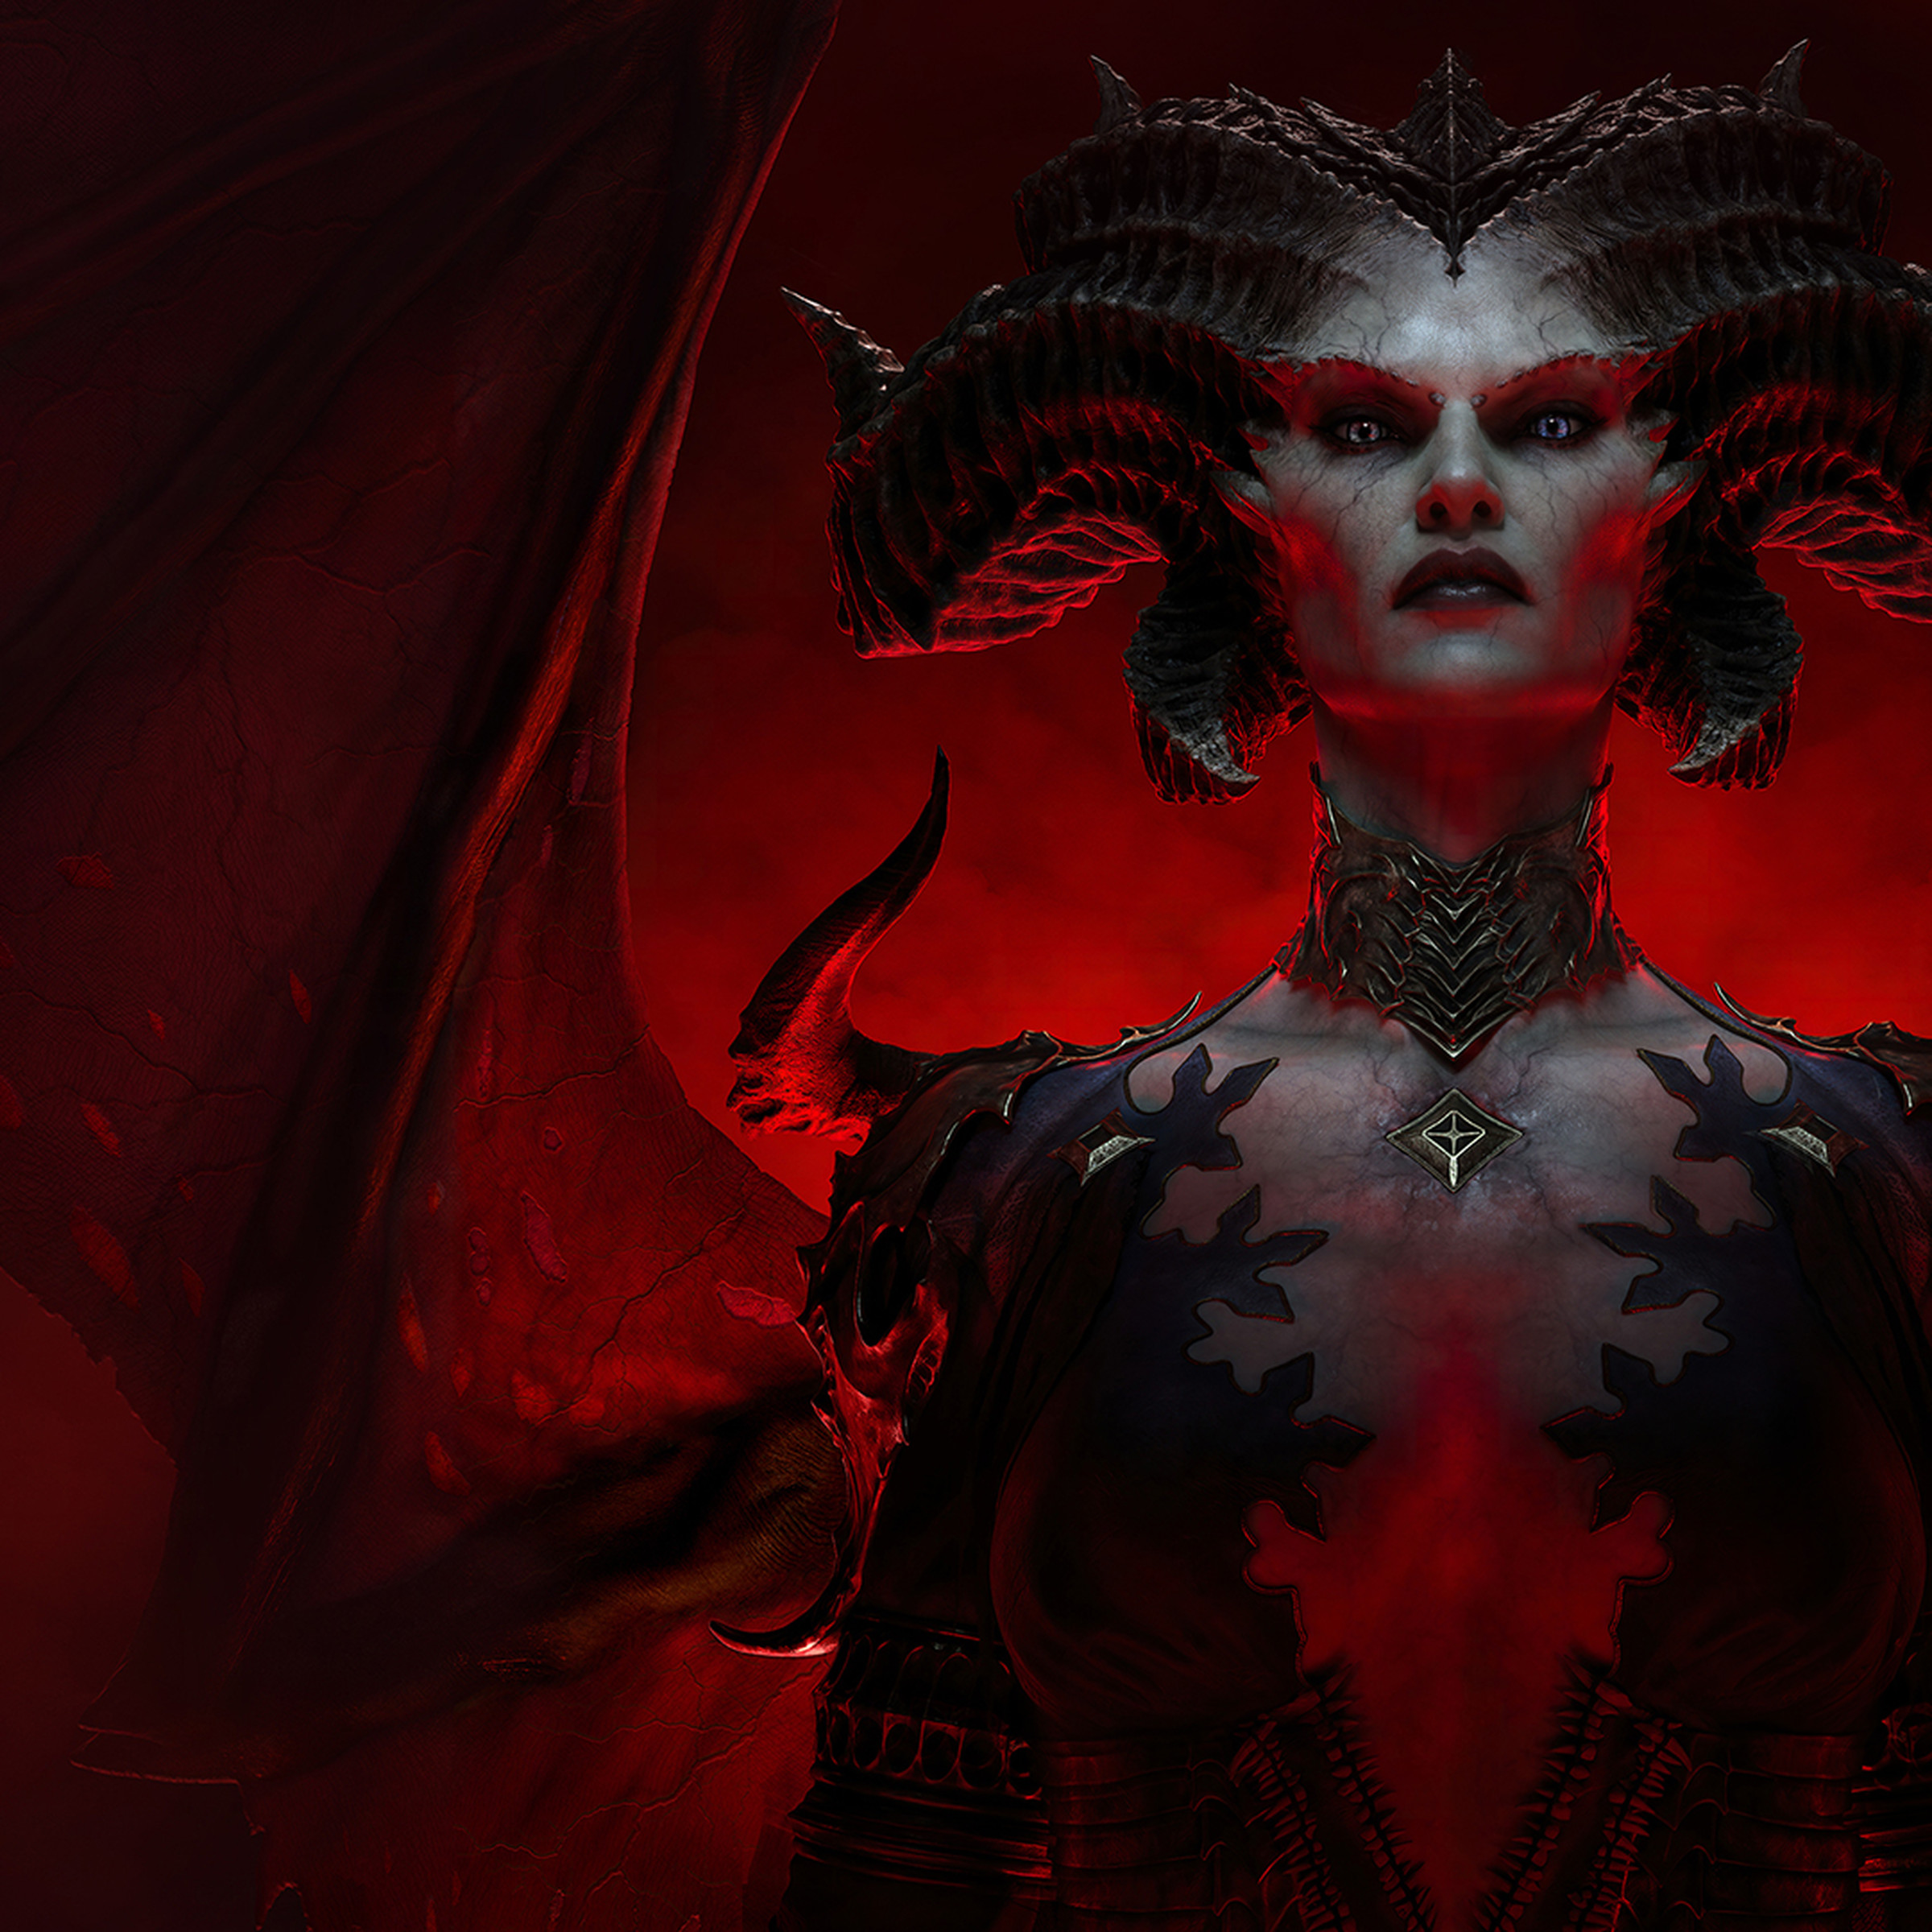 An image showing Diablo’s Lilith